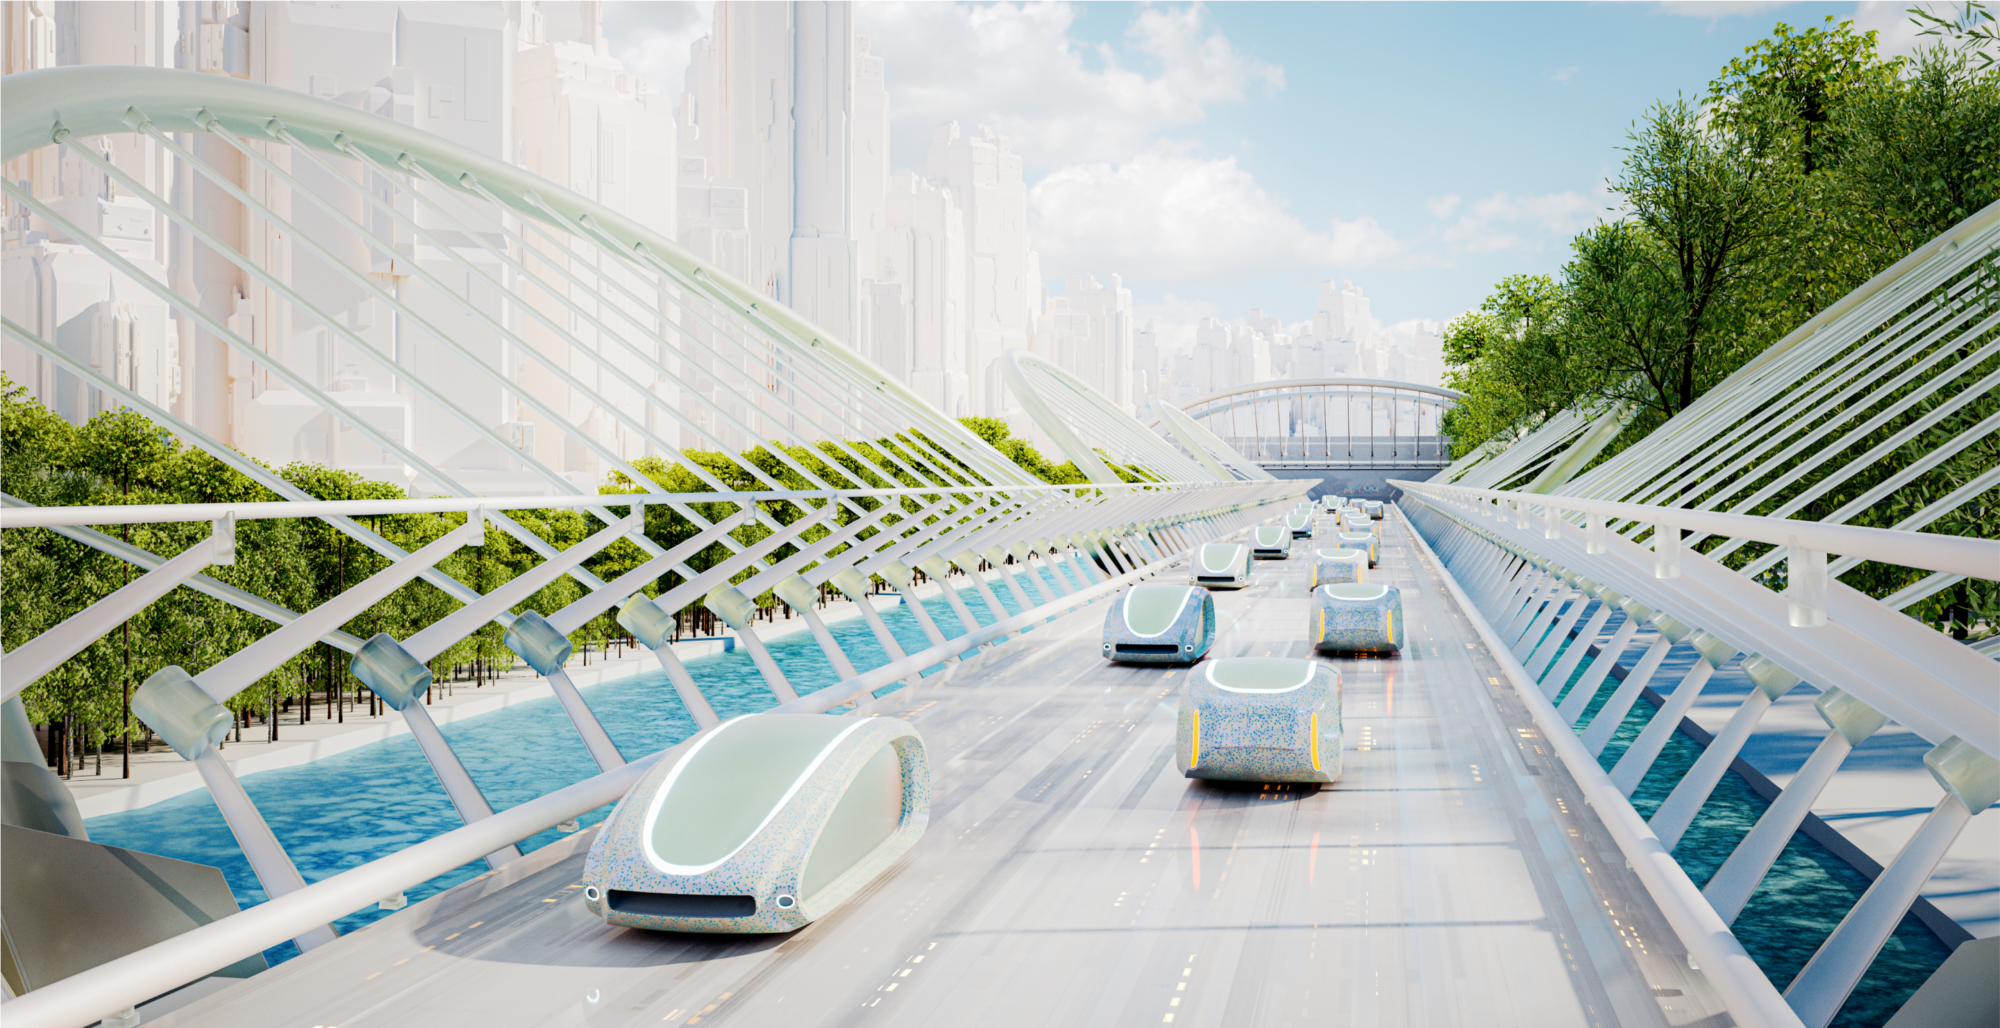 Futuristic city concept with self-driving concept cars